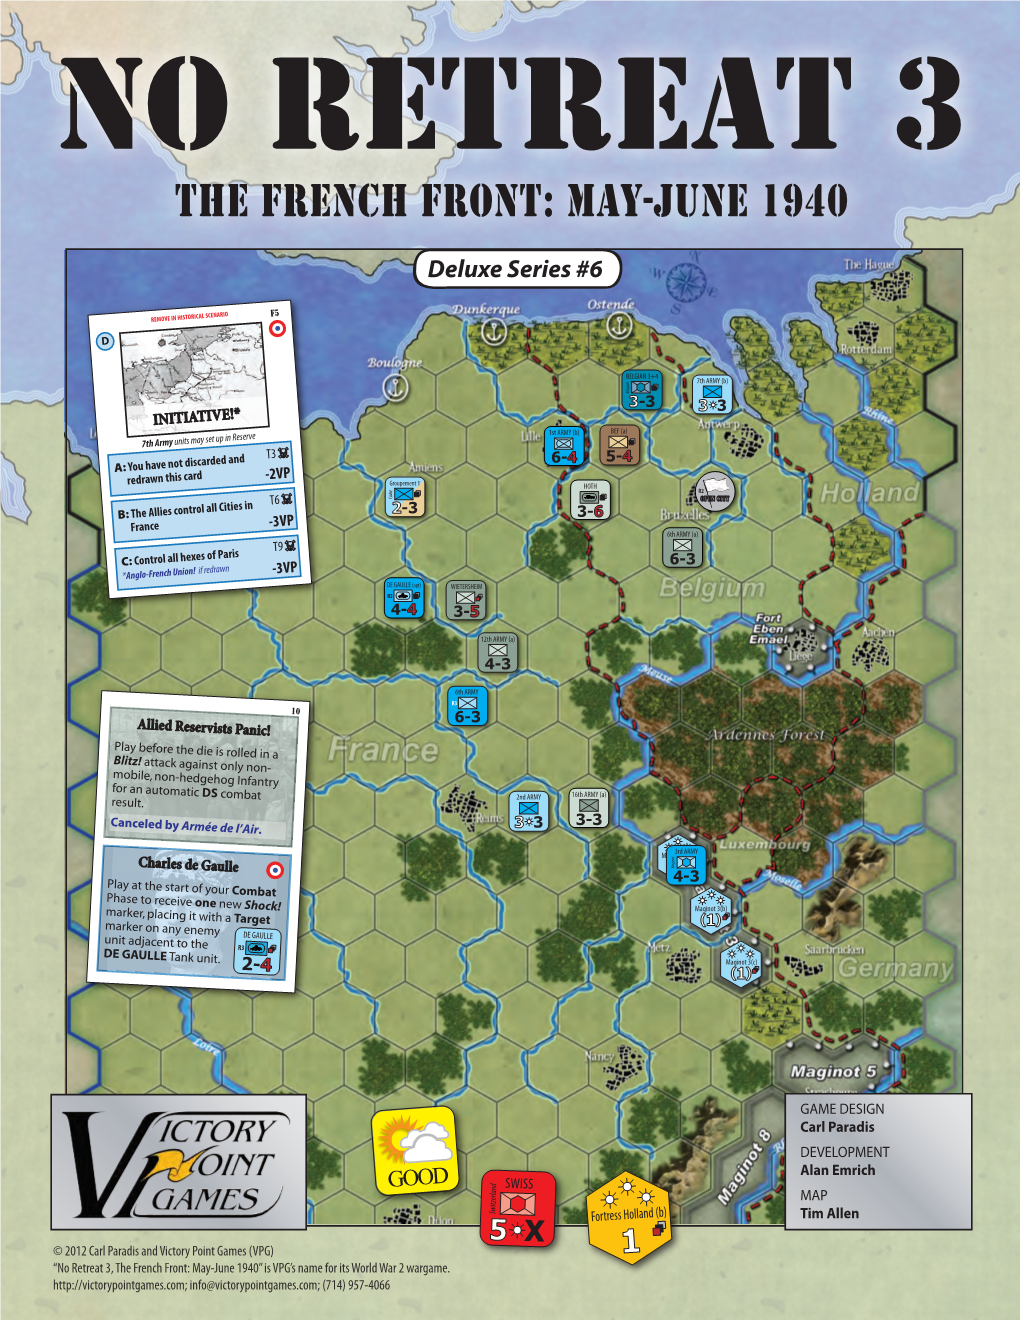 NO RETREAT! 3 the French Front May-JUNE 1940